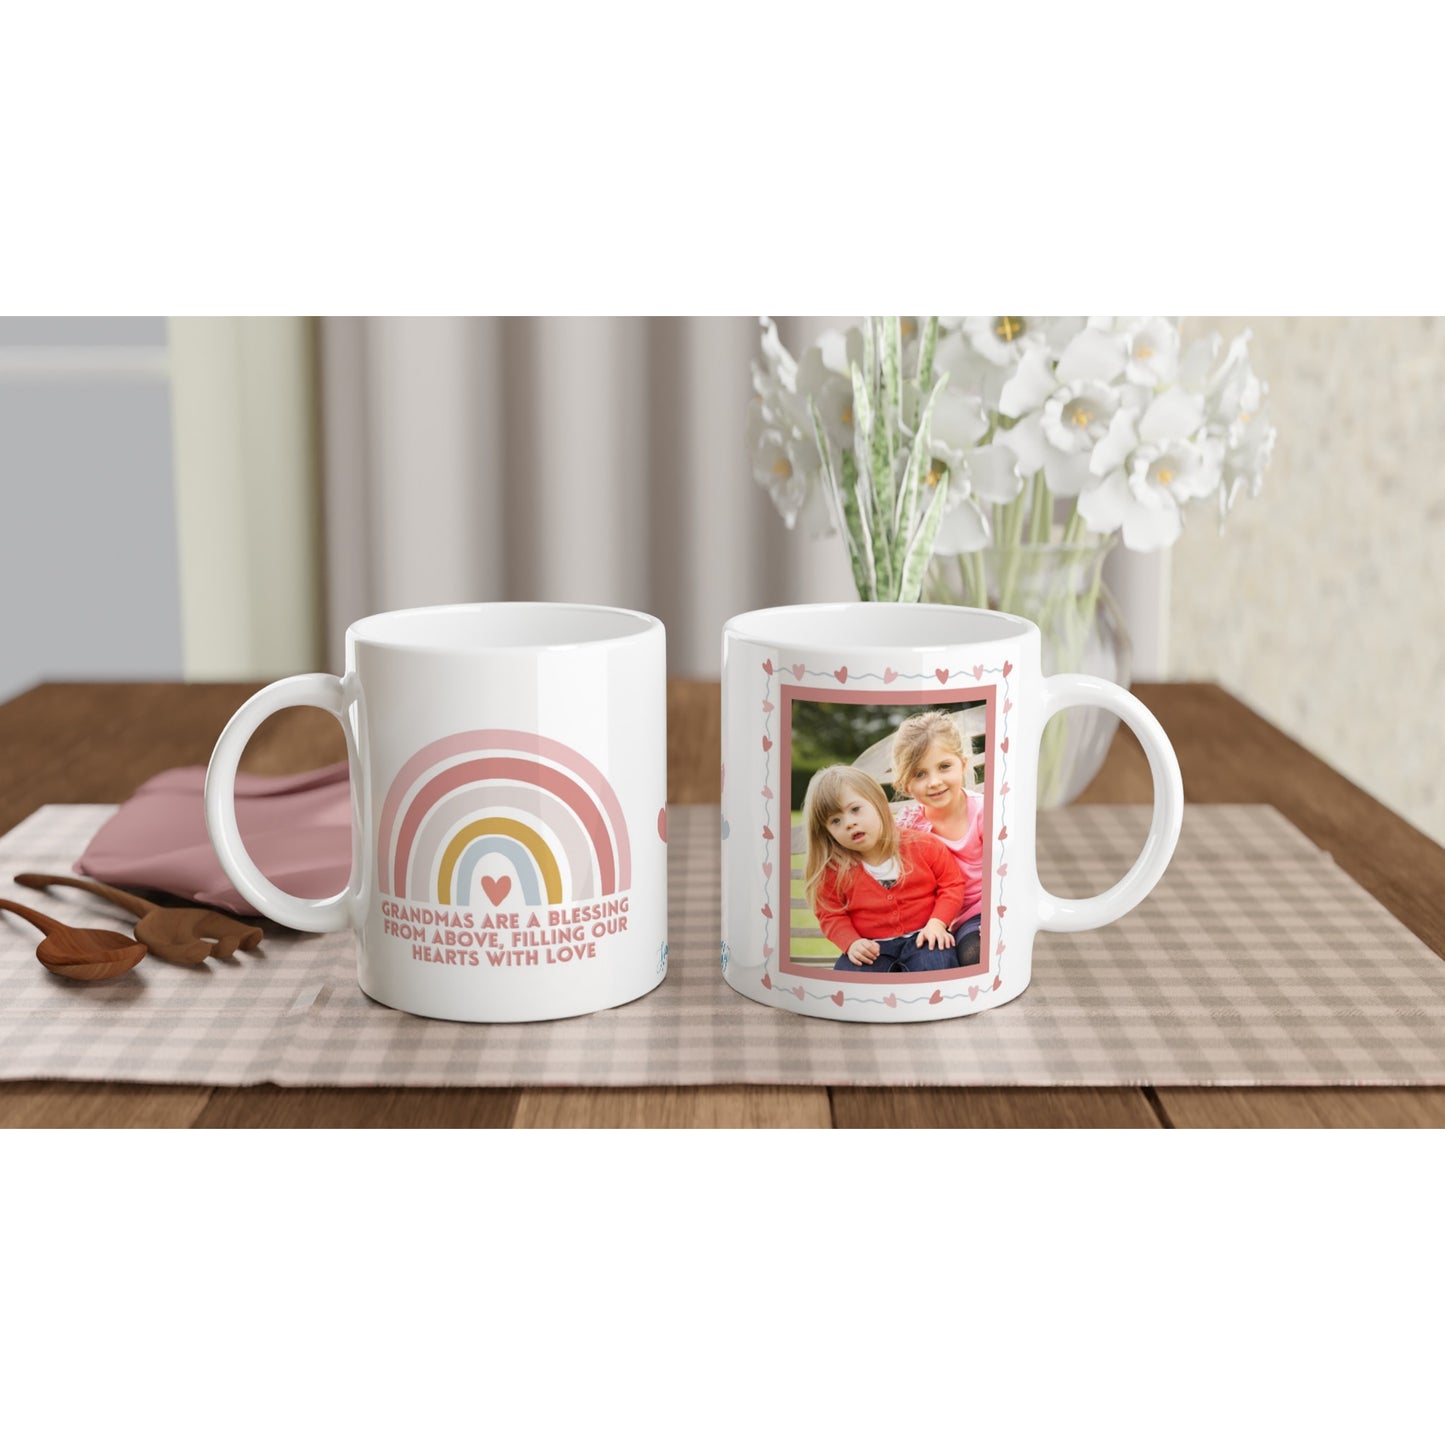 "Grandmothers are a blessing..." Customizable Photo Mug on table